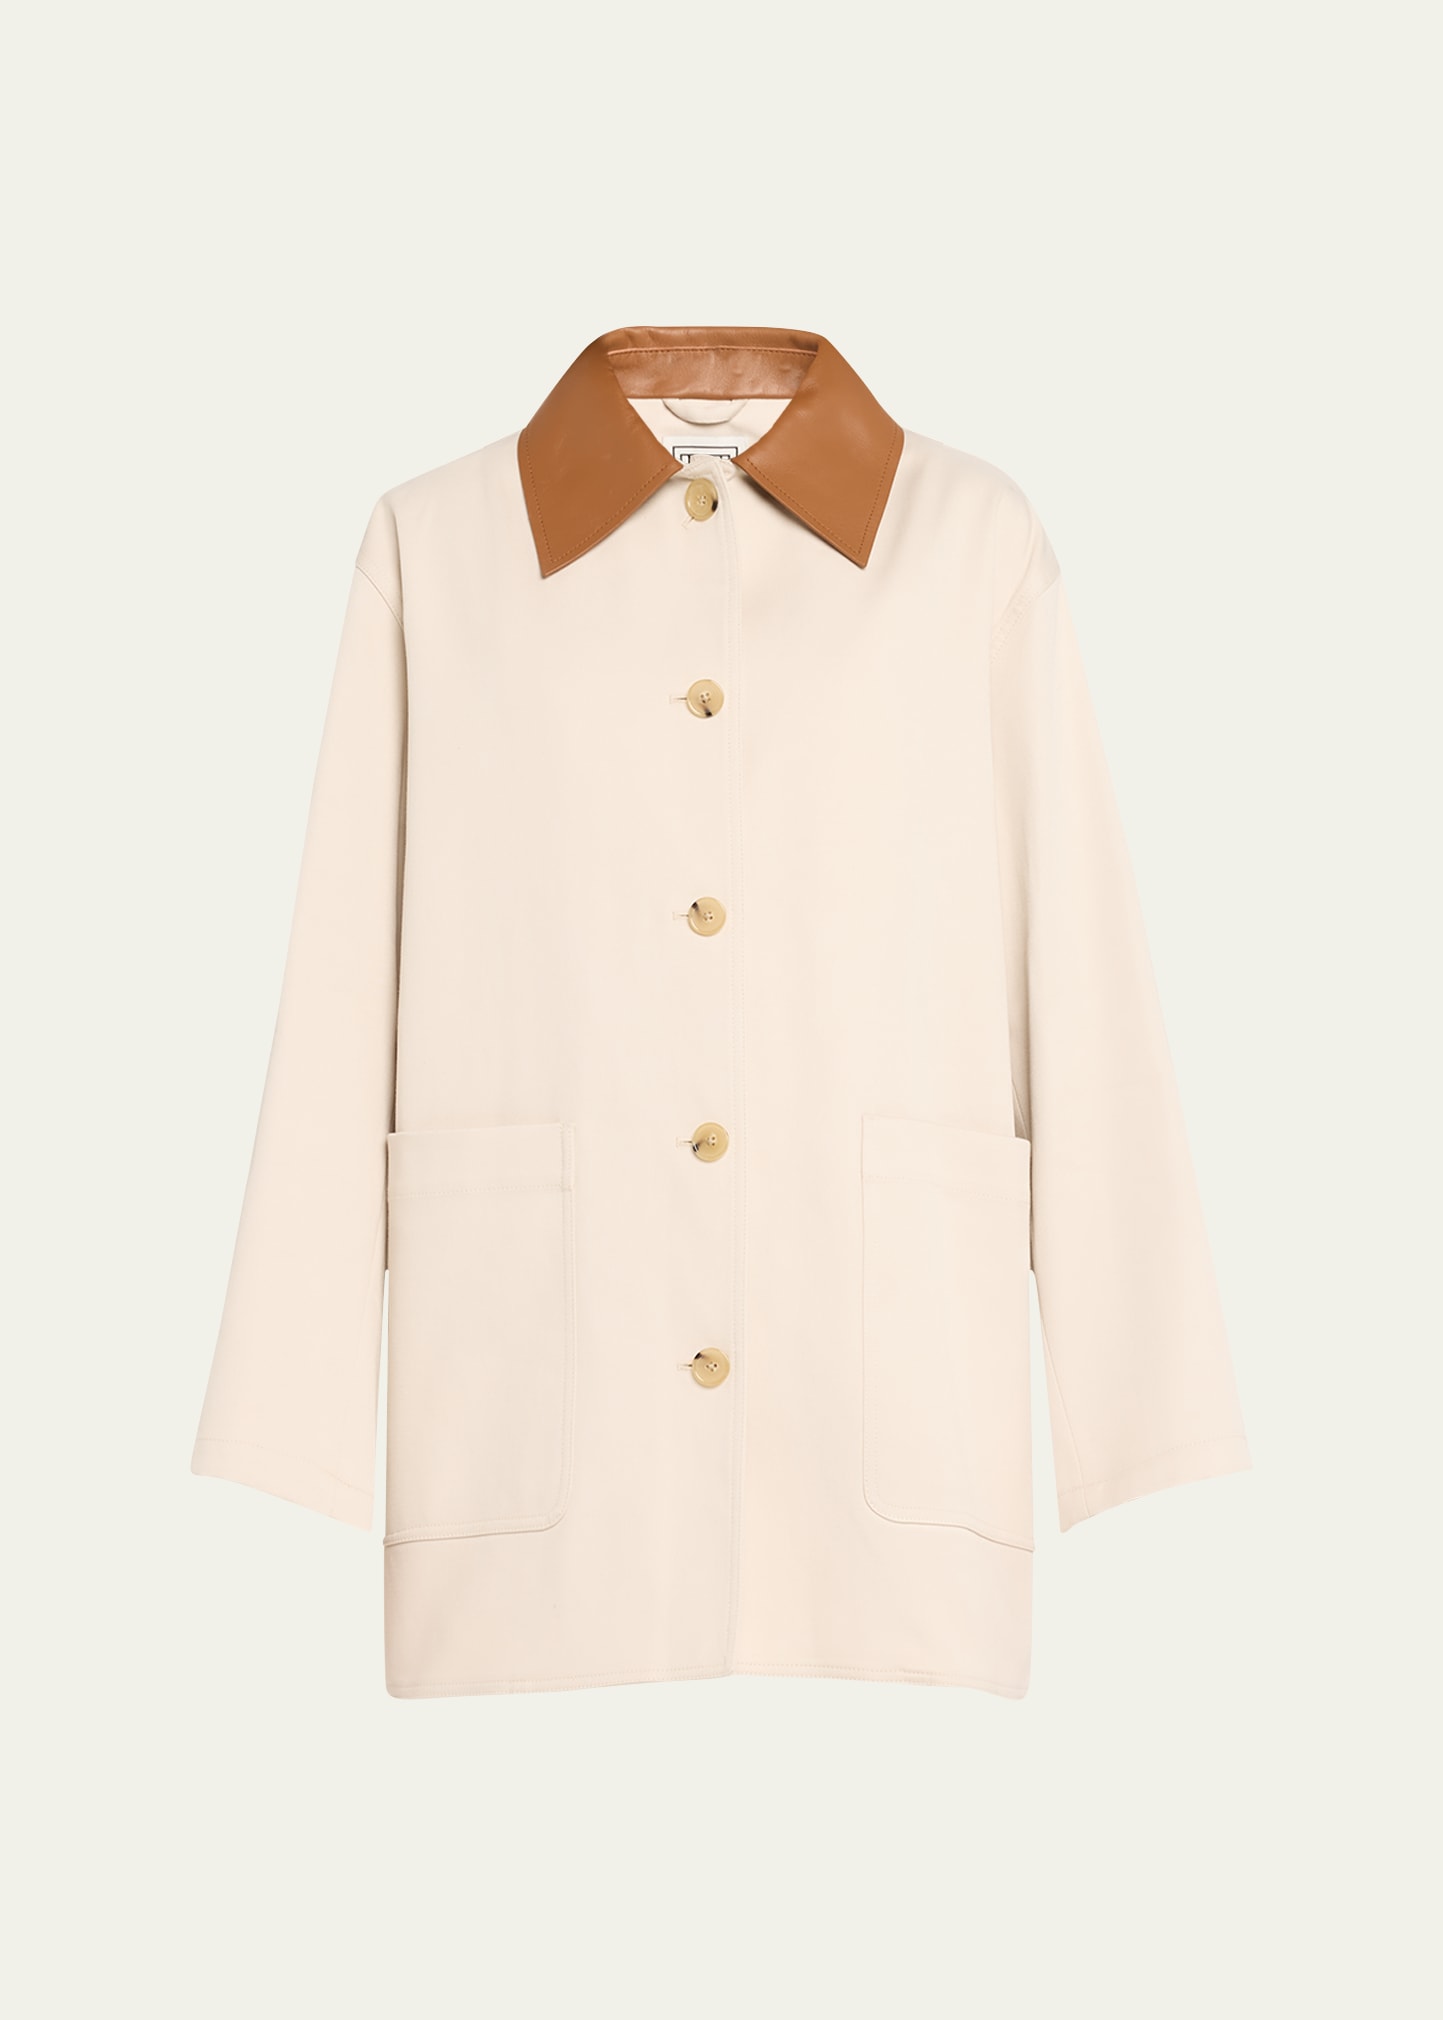 Totême Organic Cotton Barn Jacket With Leather Collar In Light/pastel Grey